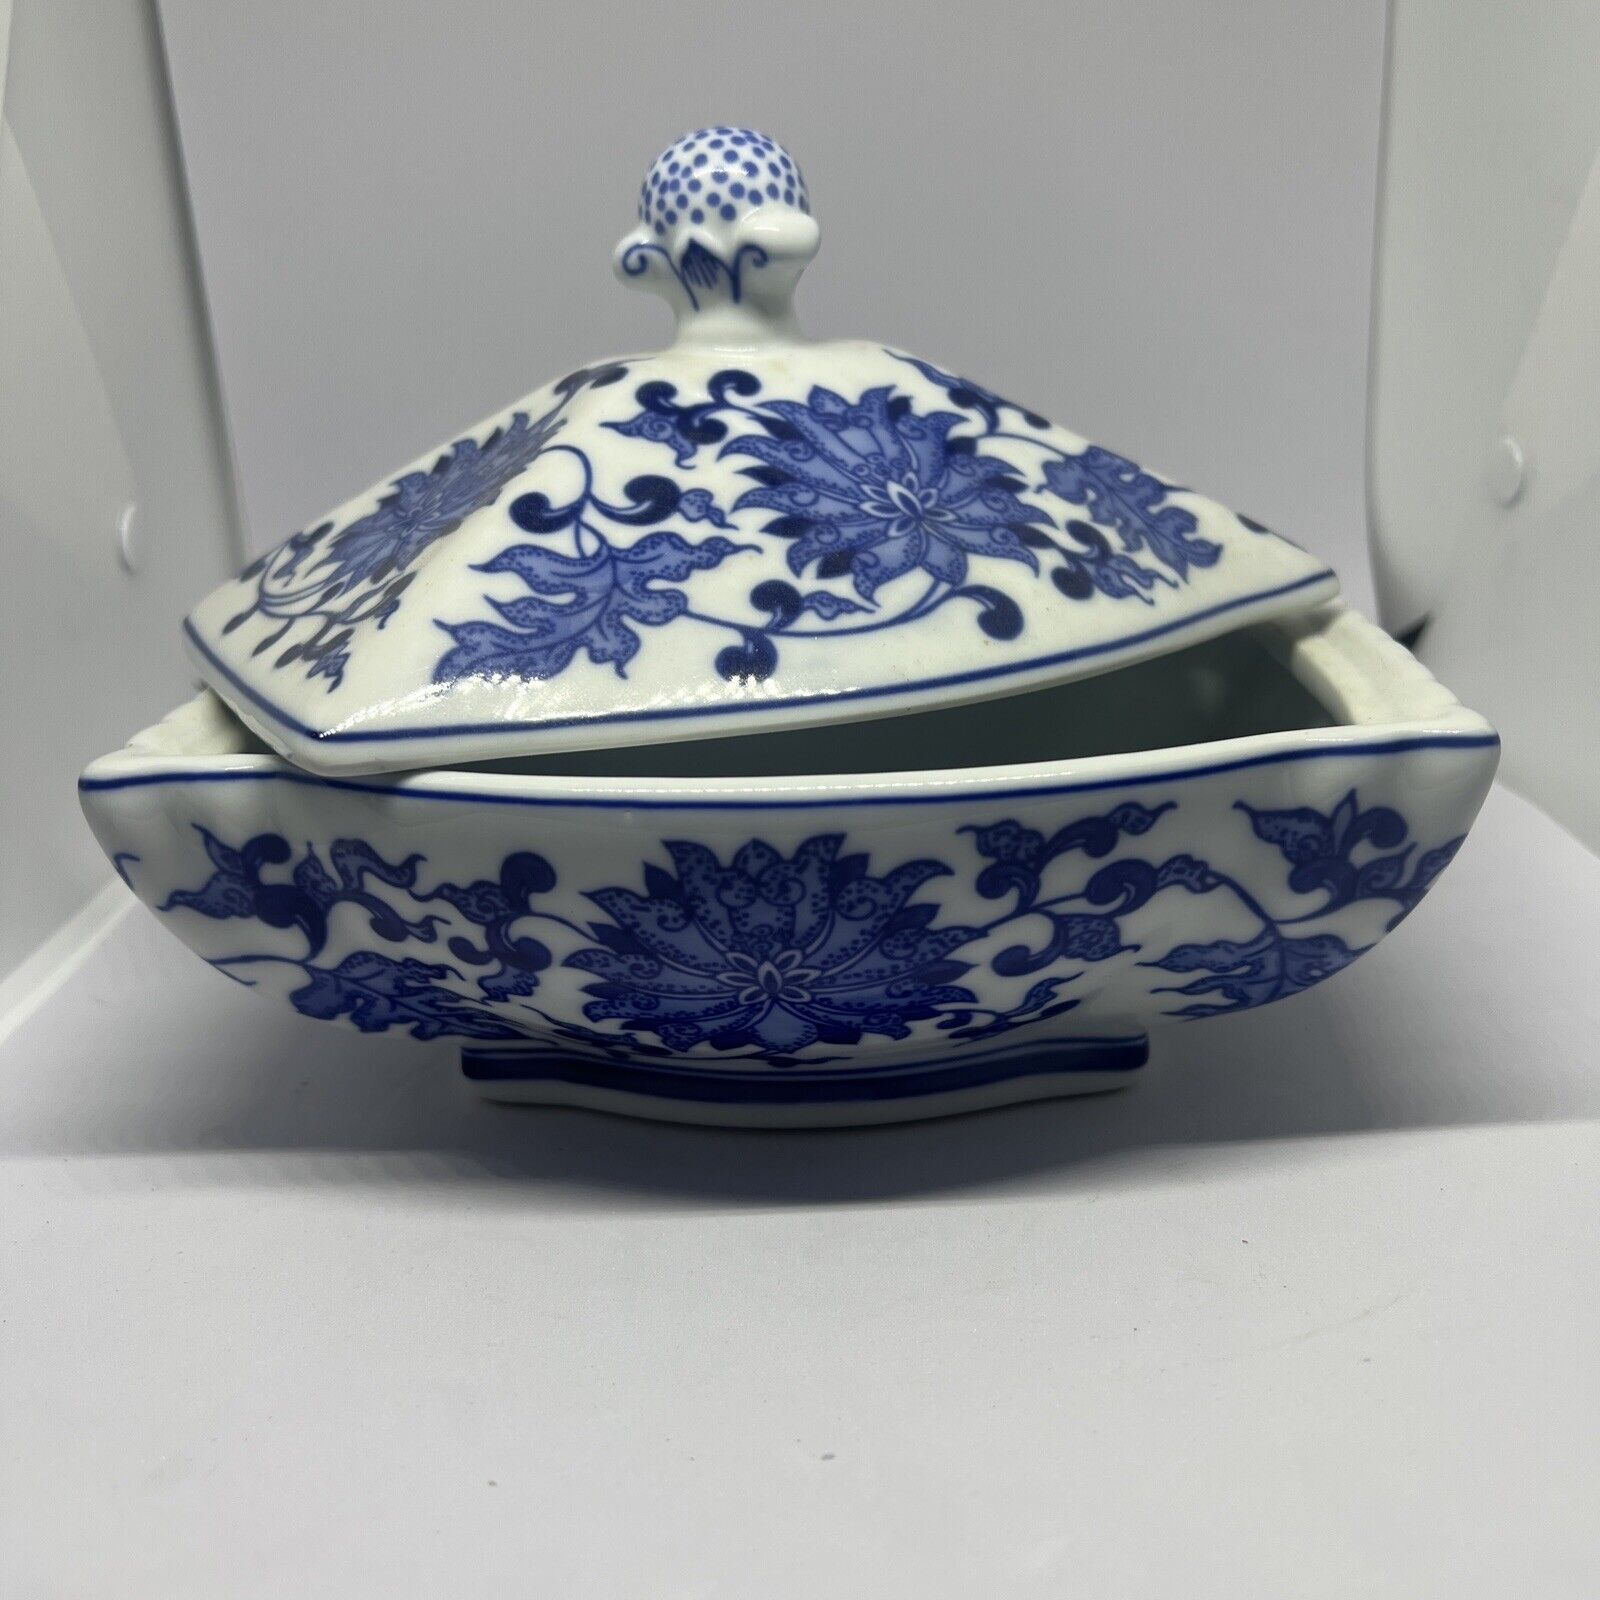 VINTAGE BOMBAY BLUE AND WHITE PORCELAIN  COVERED DISH CLASSIC STYLE CLASSY